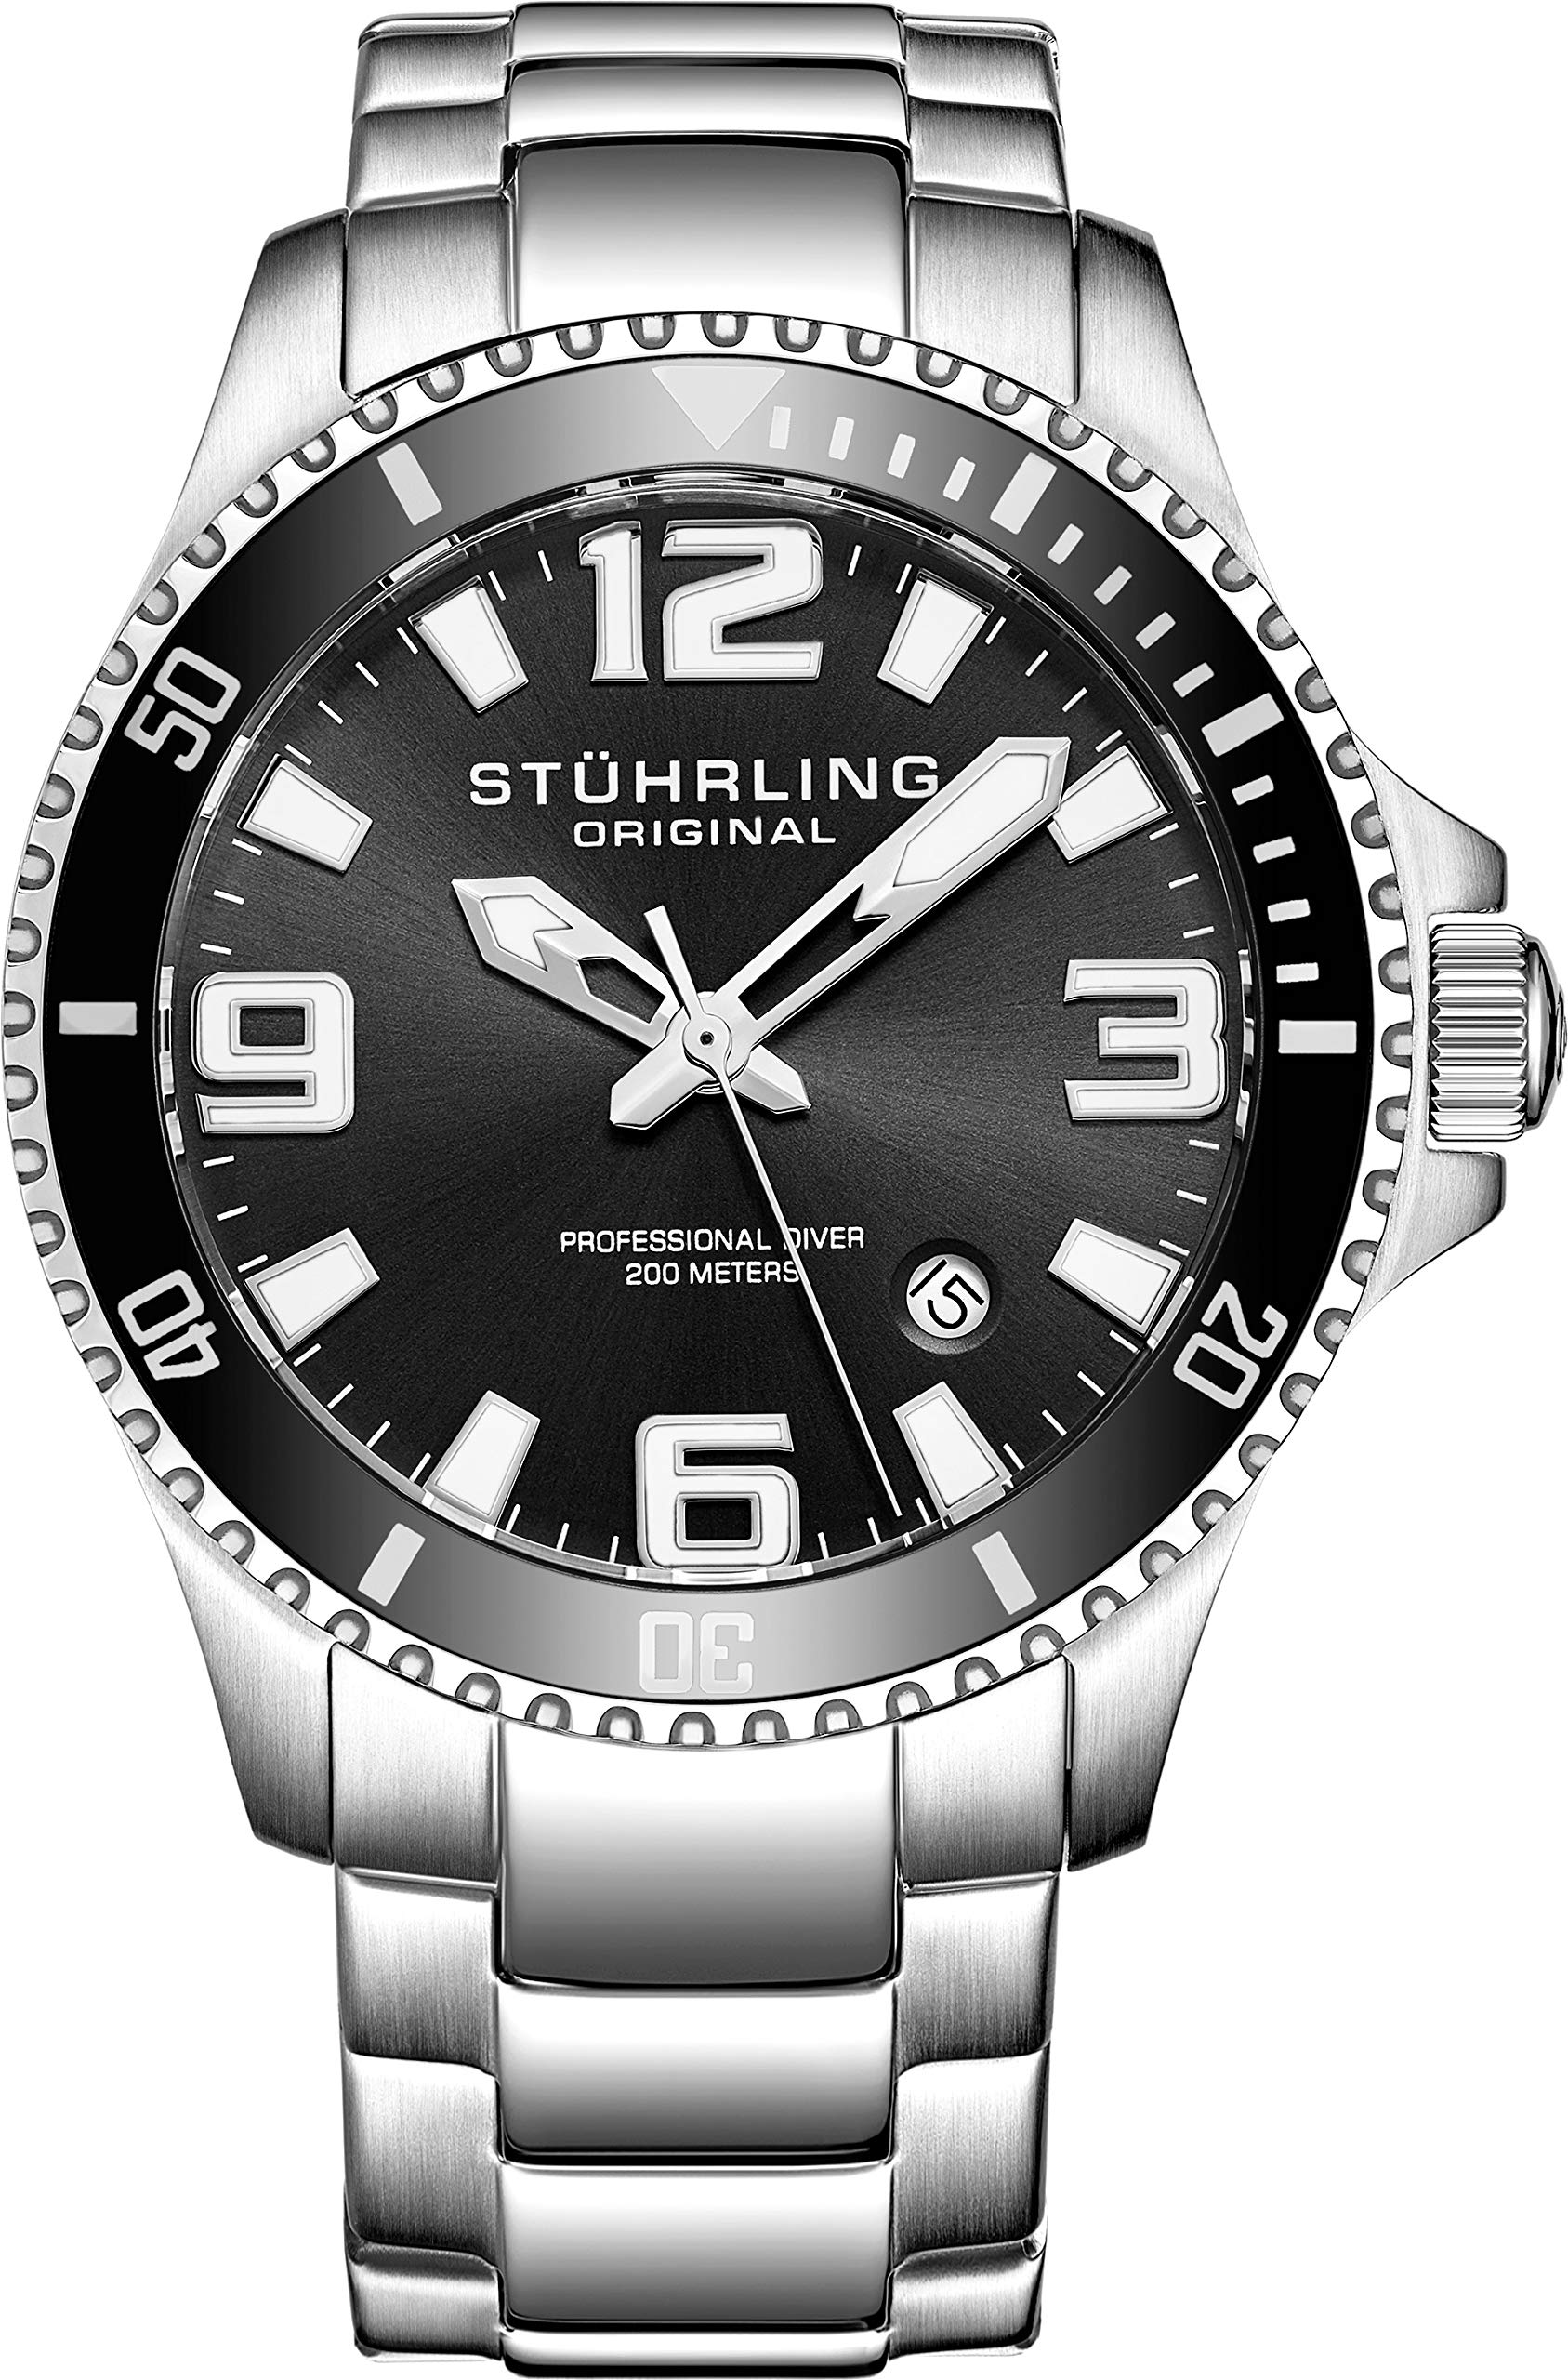 Stuhrling Original Mens Analog Dive Watch - Sports Watch Water Resistant 100 Meters - Watches for Men Aqua-Diver Stainless Steel Link Bracelet Mens Watches Collection (Black)